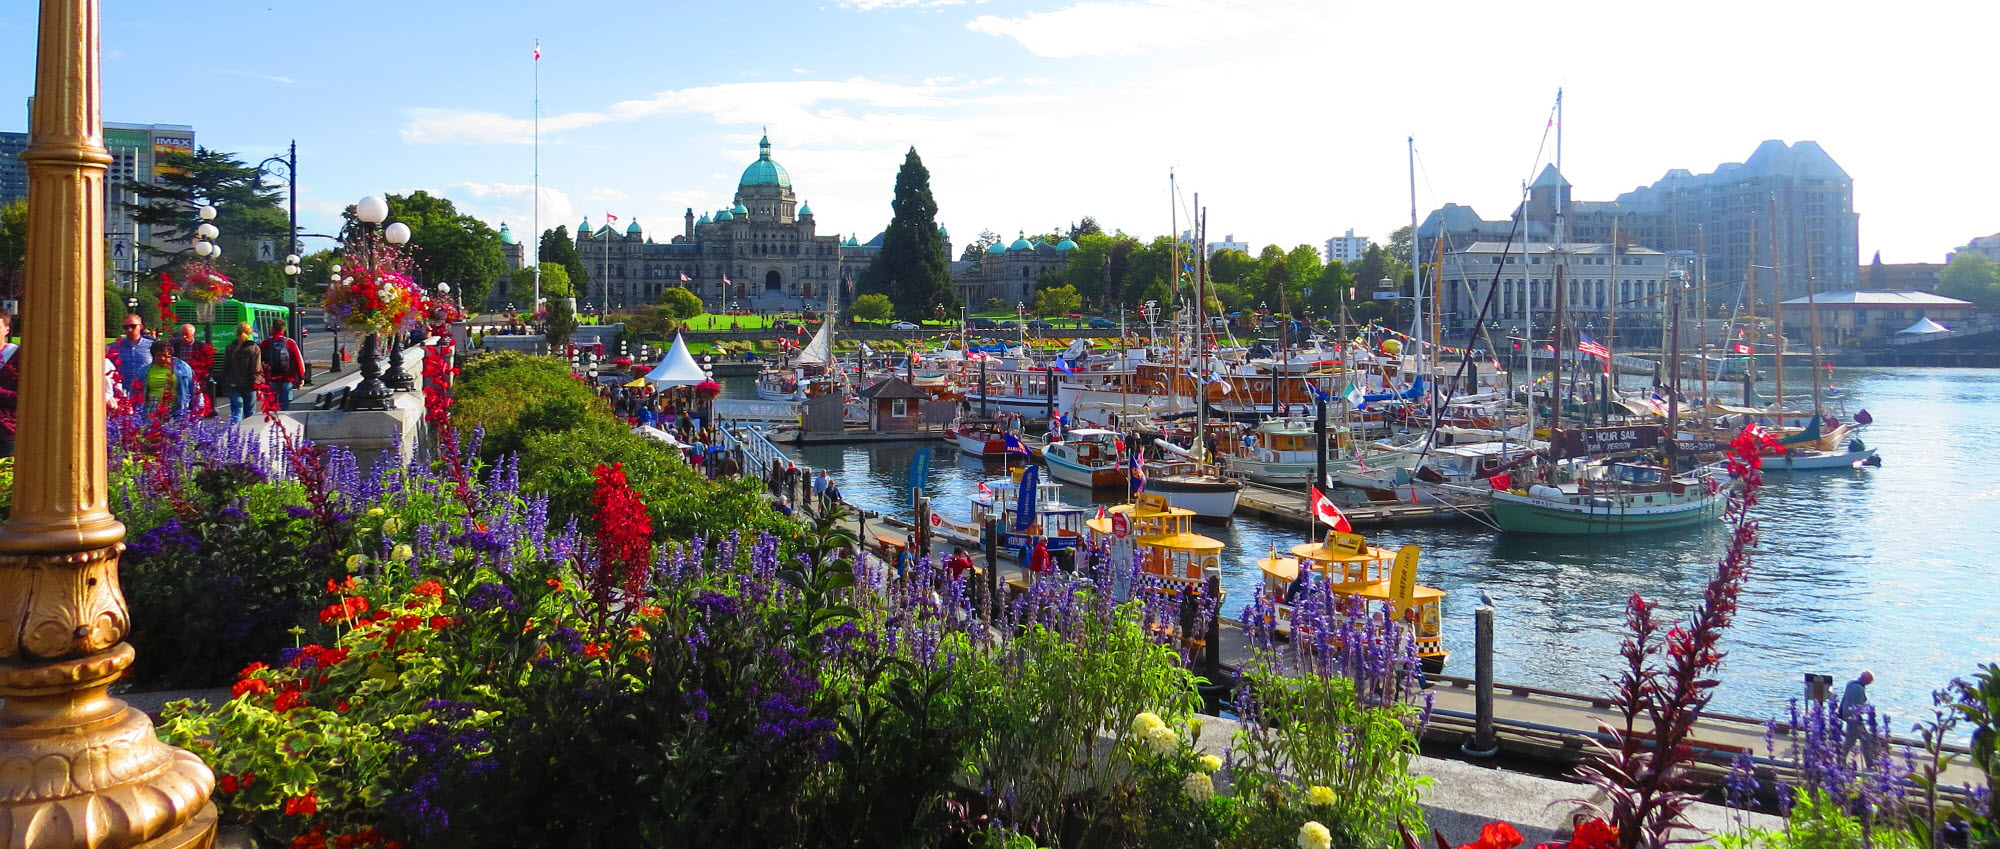 The tranquil surroundings of Victoria, BC, assisting in overcoming drug addiction.